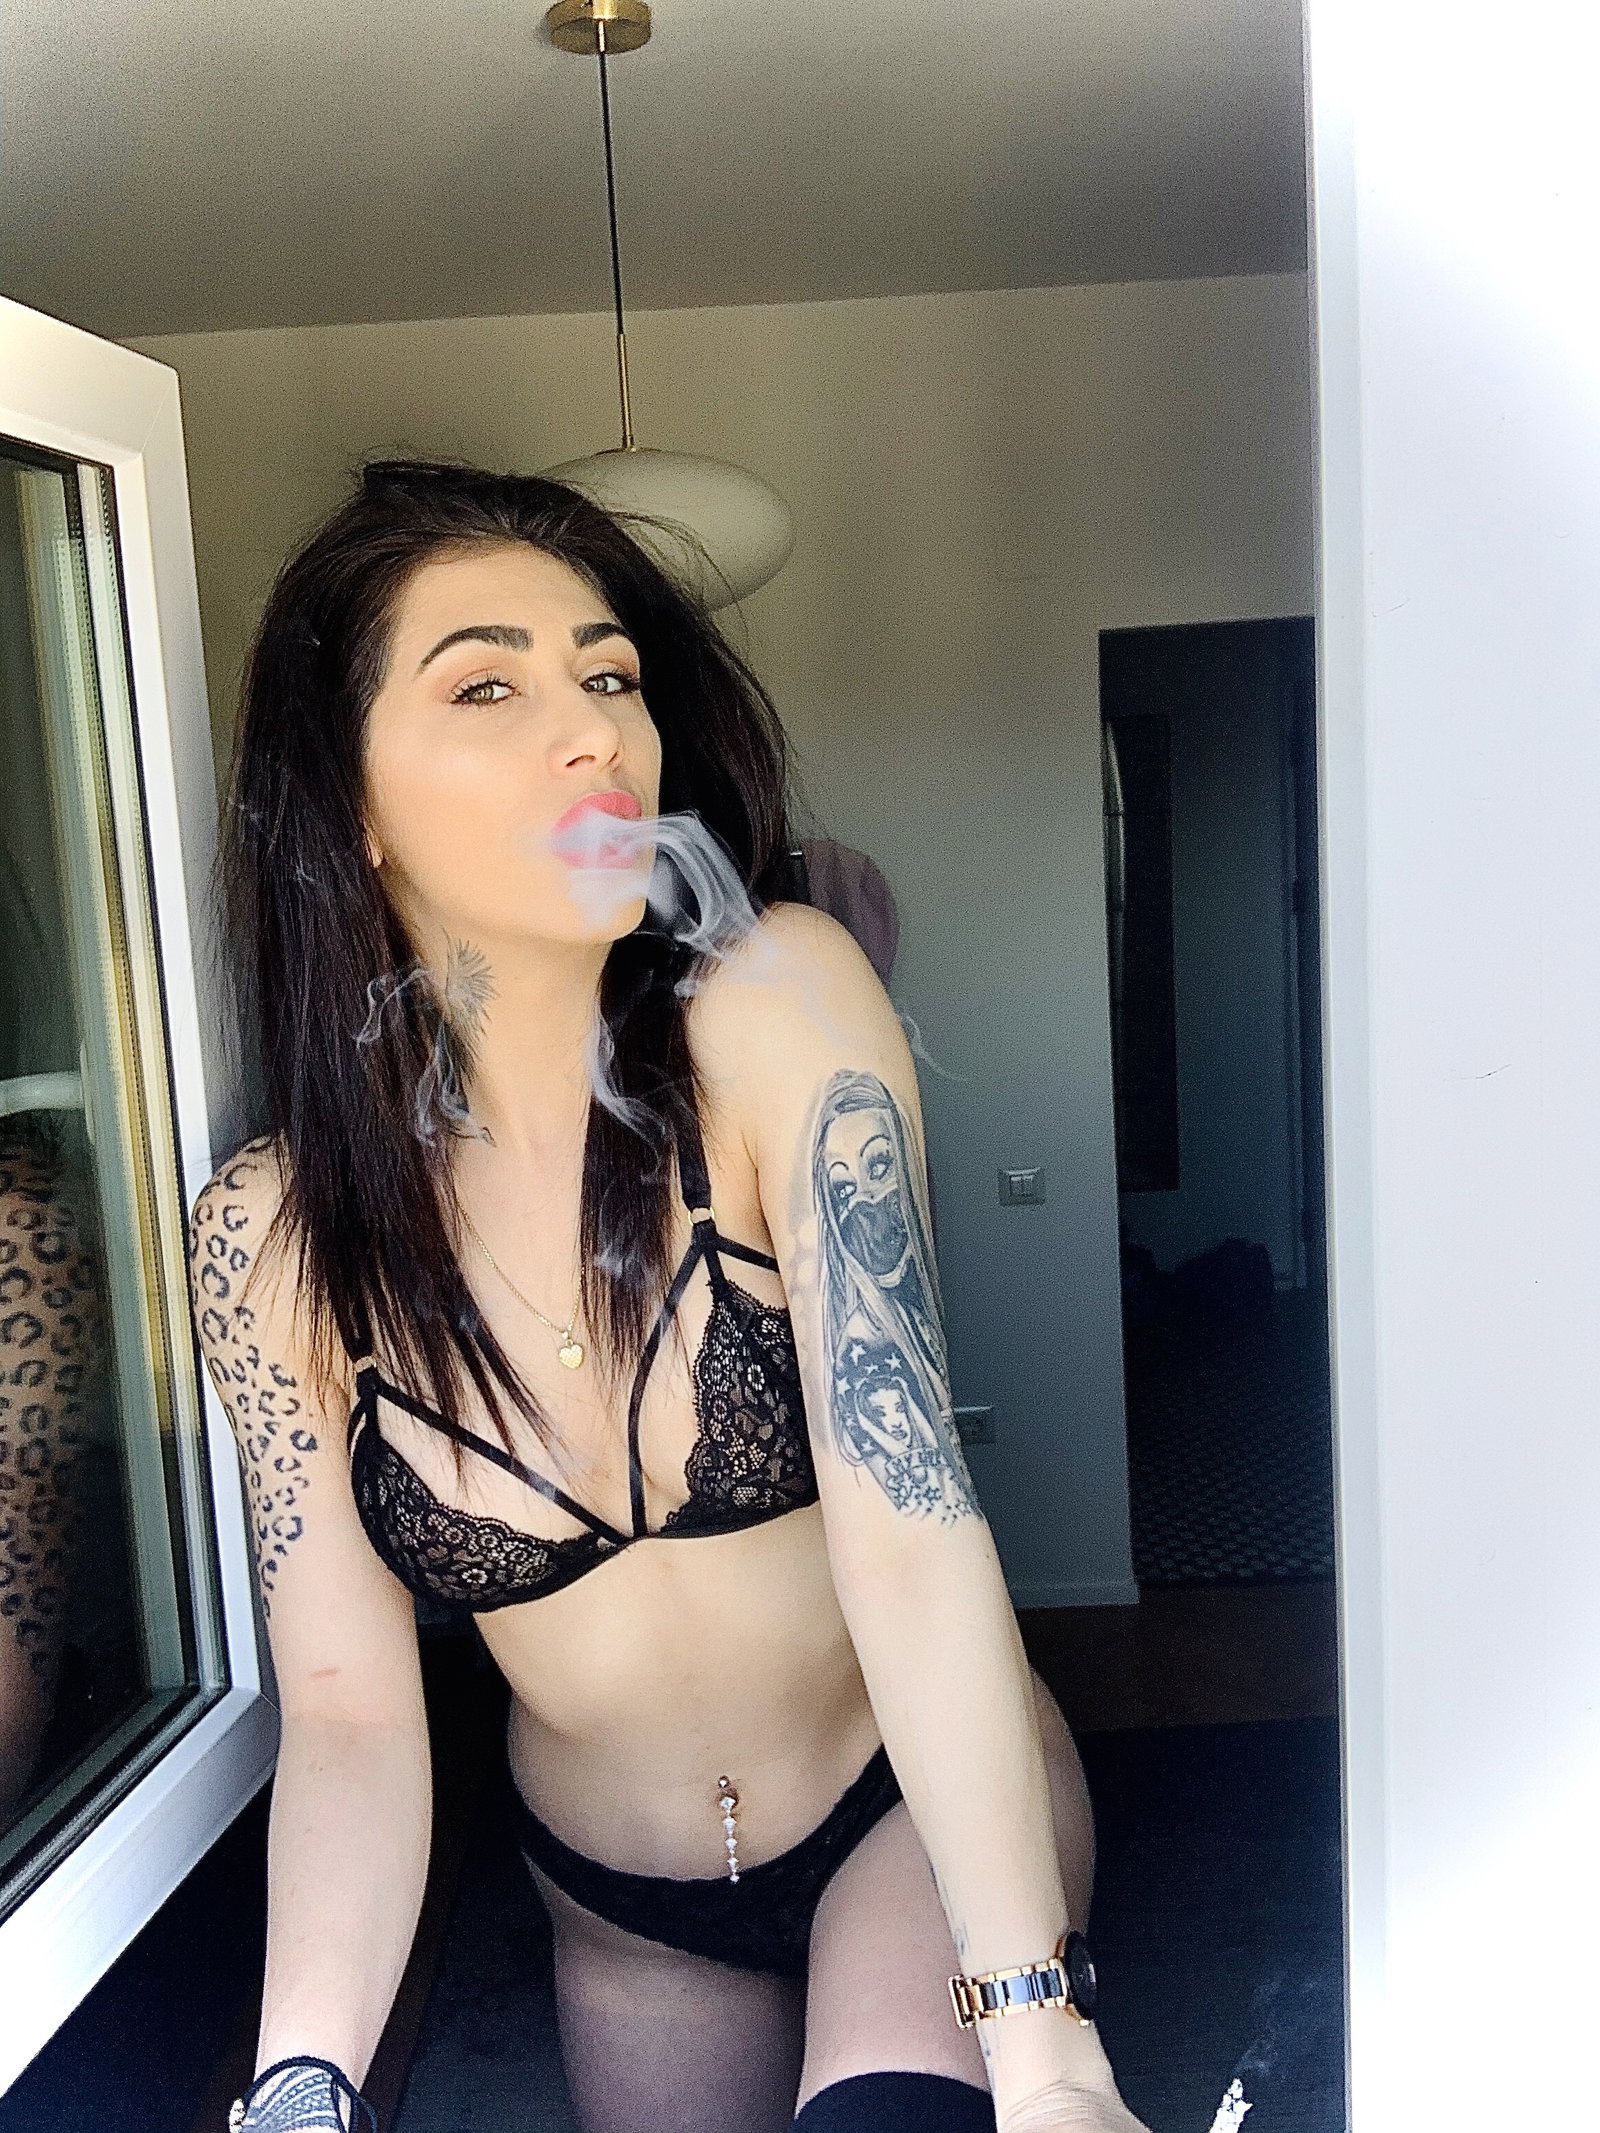 Photo by Aysha Rosse with the username @AyshaRosse, who is a star user,  April 11, 2020 at 11:00 AM. The post is about the topic Sexy Lingerie and the text says ':* #Sharesome #SharesomeLove #ManyVids #Instagram #brunette #tattoo #sexy #cutegirl #sexygirl #hit #pritty #teen #young #adorable'